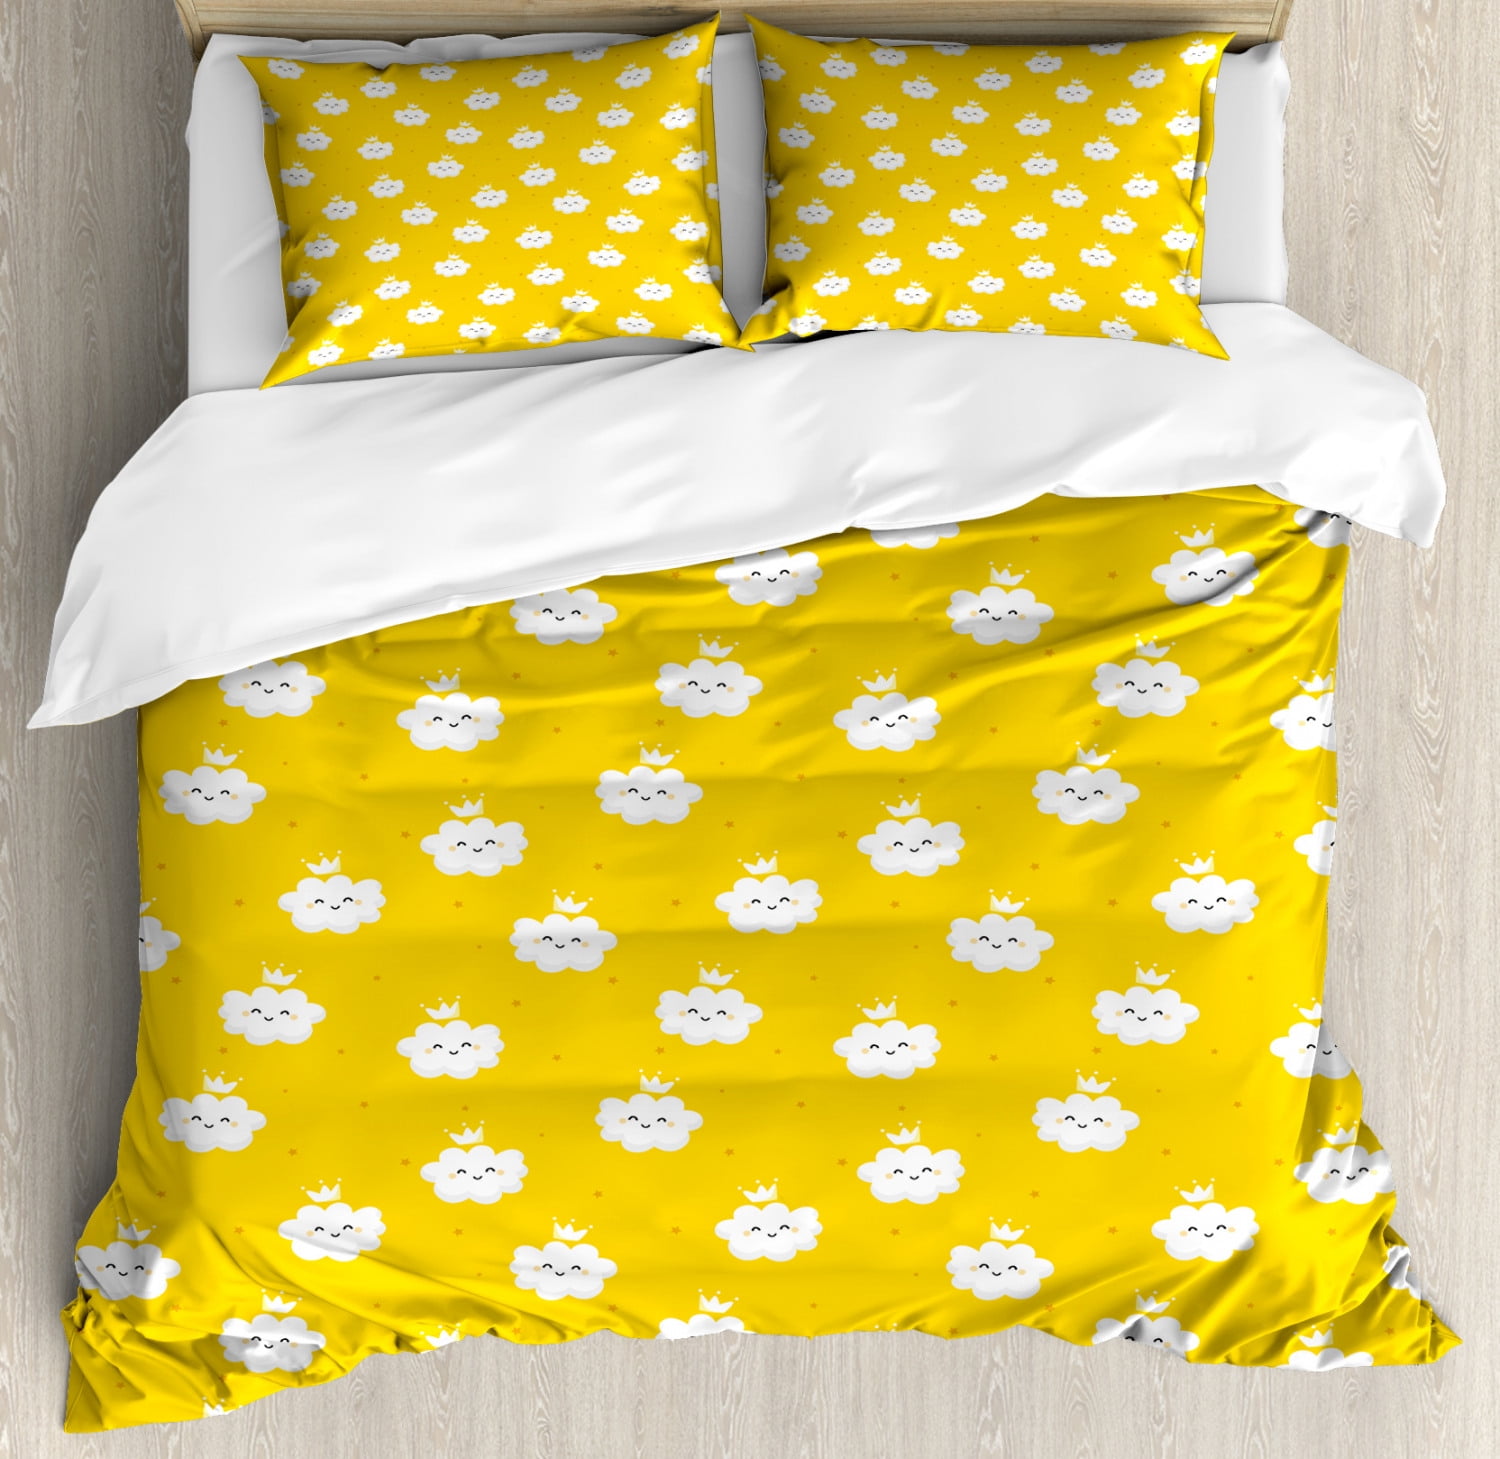 Yellow And White Queen Size Duvet Cover Set Cute Cloud Princesses